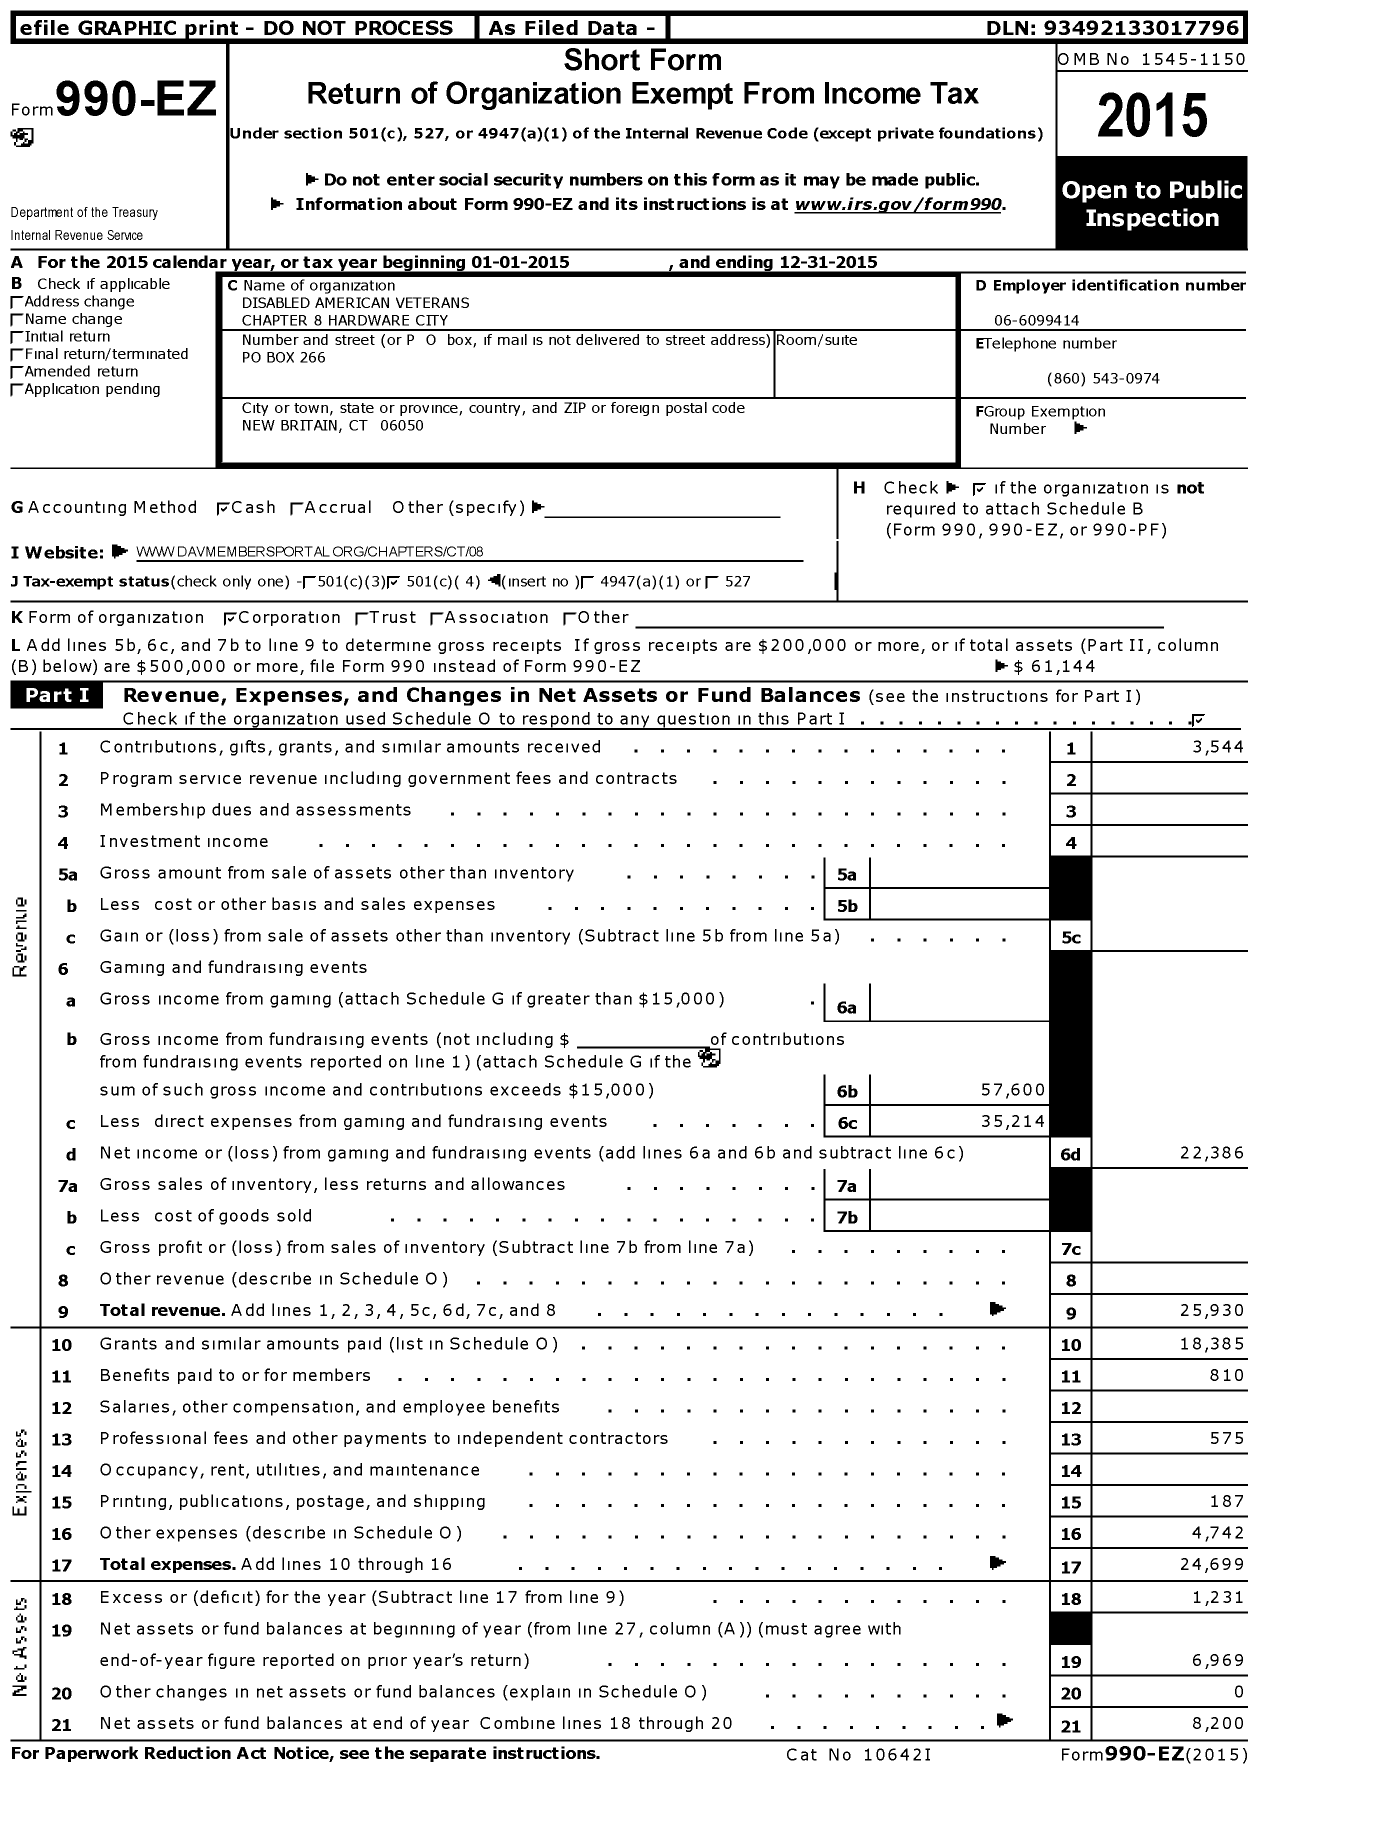 Image of first page of 2015 Form 990EO for Disabled American Veterans Chapter 8 Hardware City